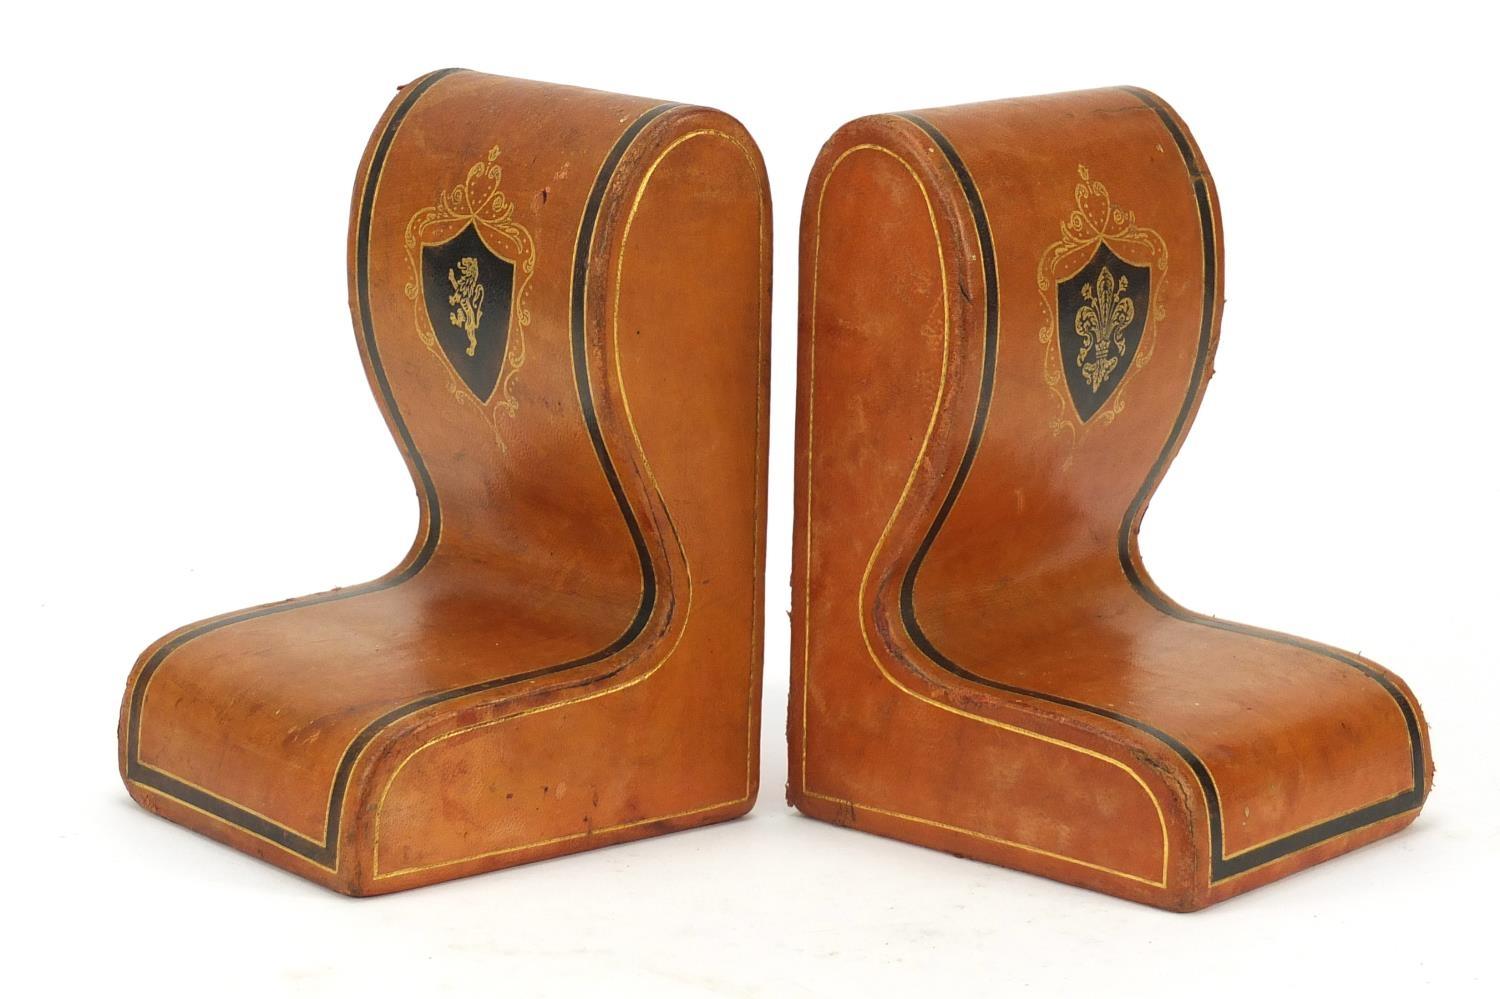 Pair of Italian tooled leather book ends with embossed crests, retailed by Harrods, each 17cm high :